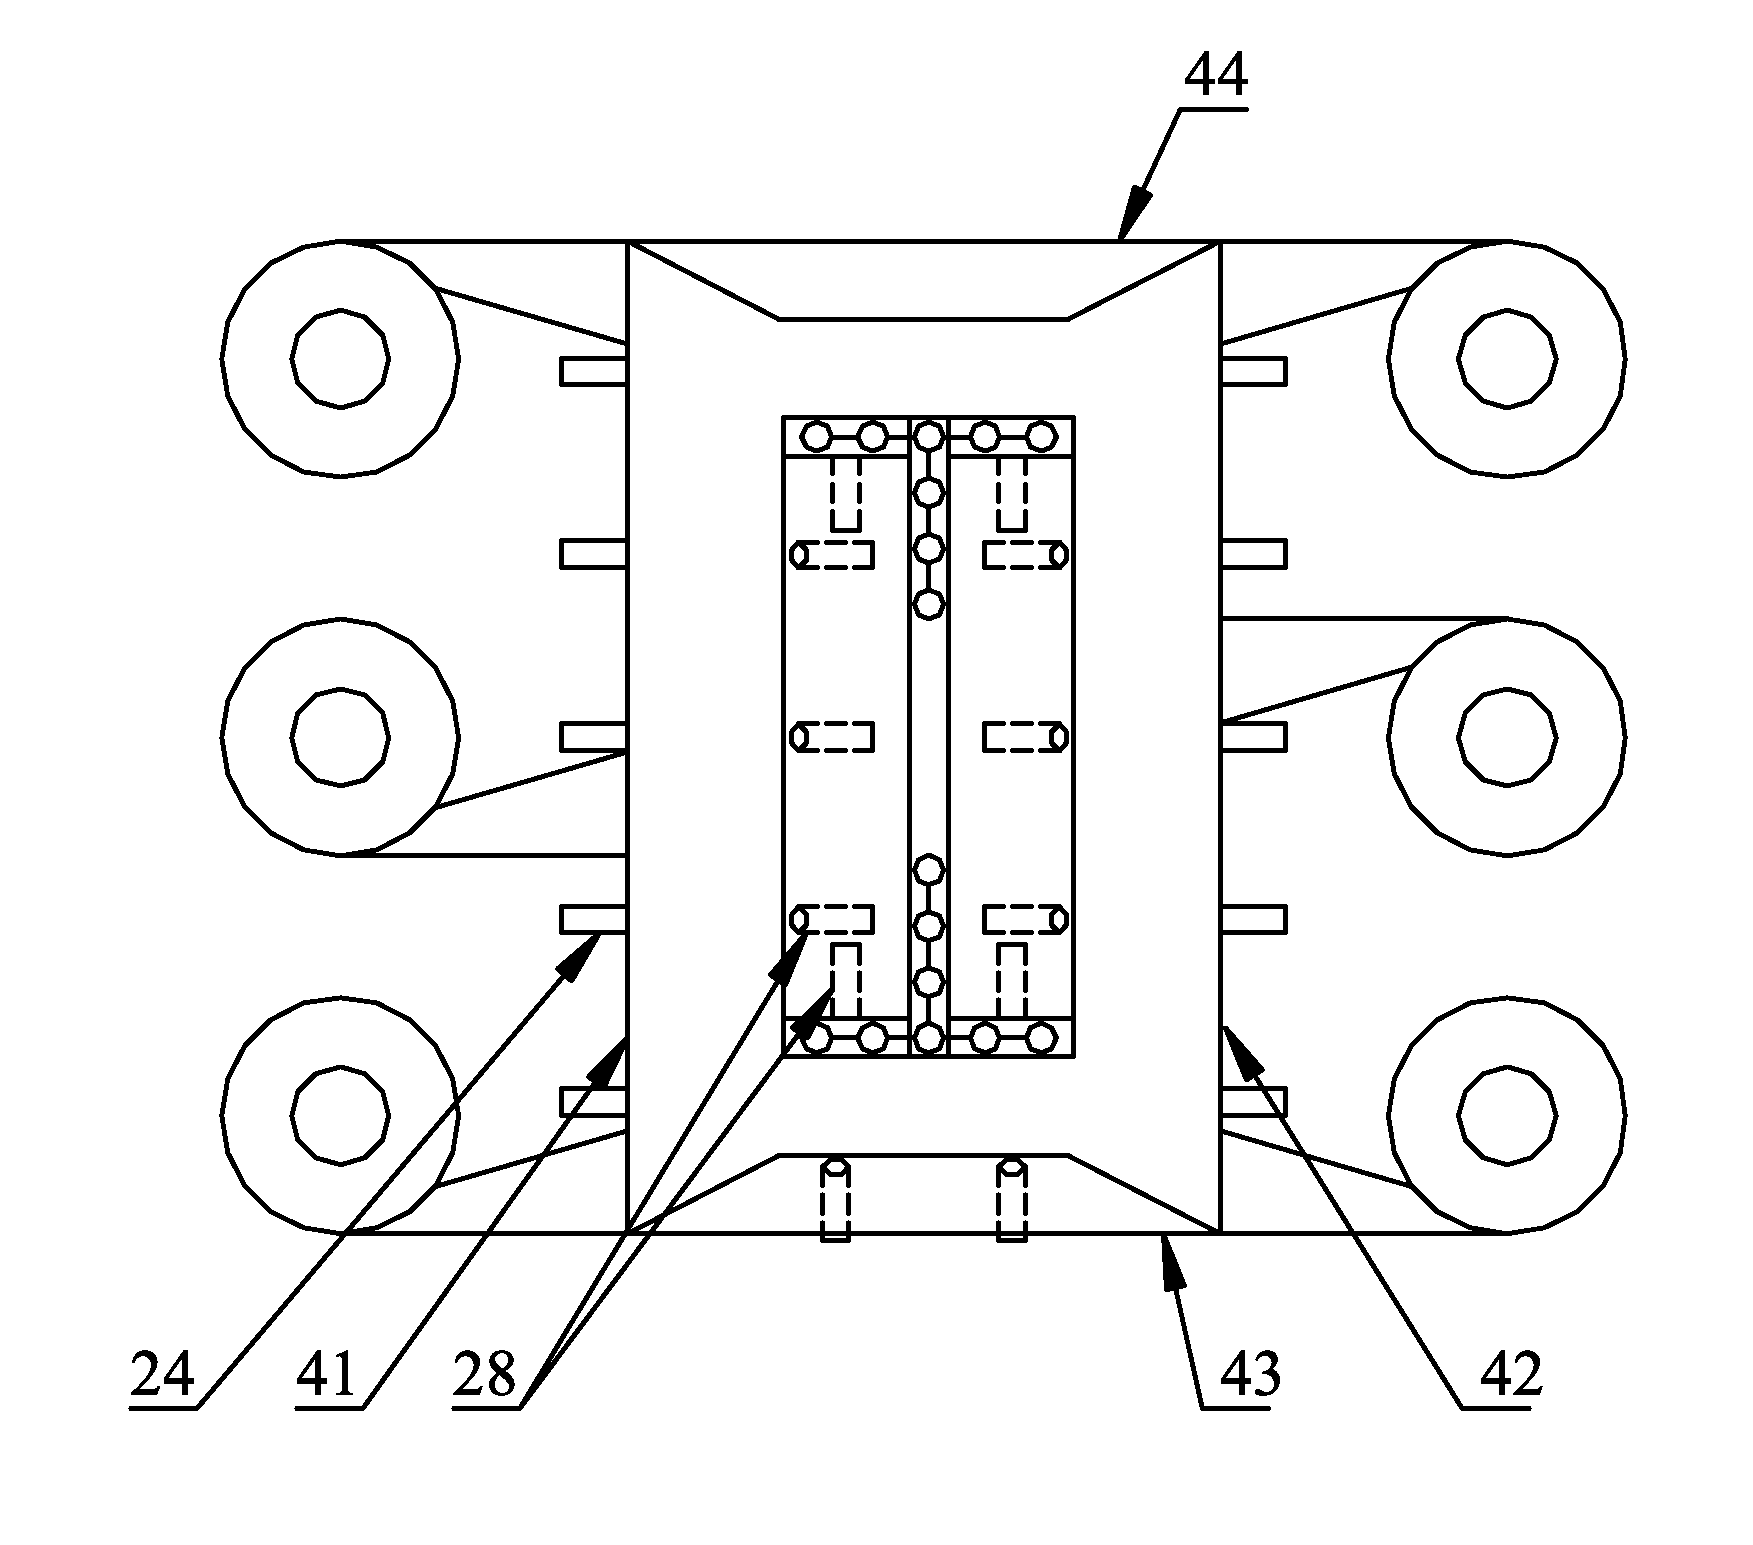 Large-size Circulating Fluidized Bed Boiler, Air Distributor and Air Distributor Assembly